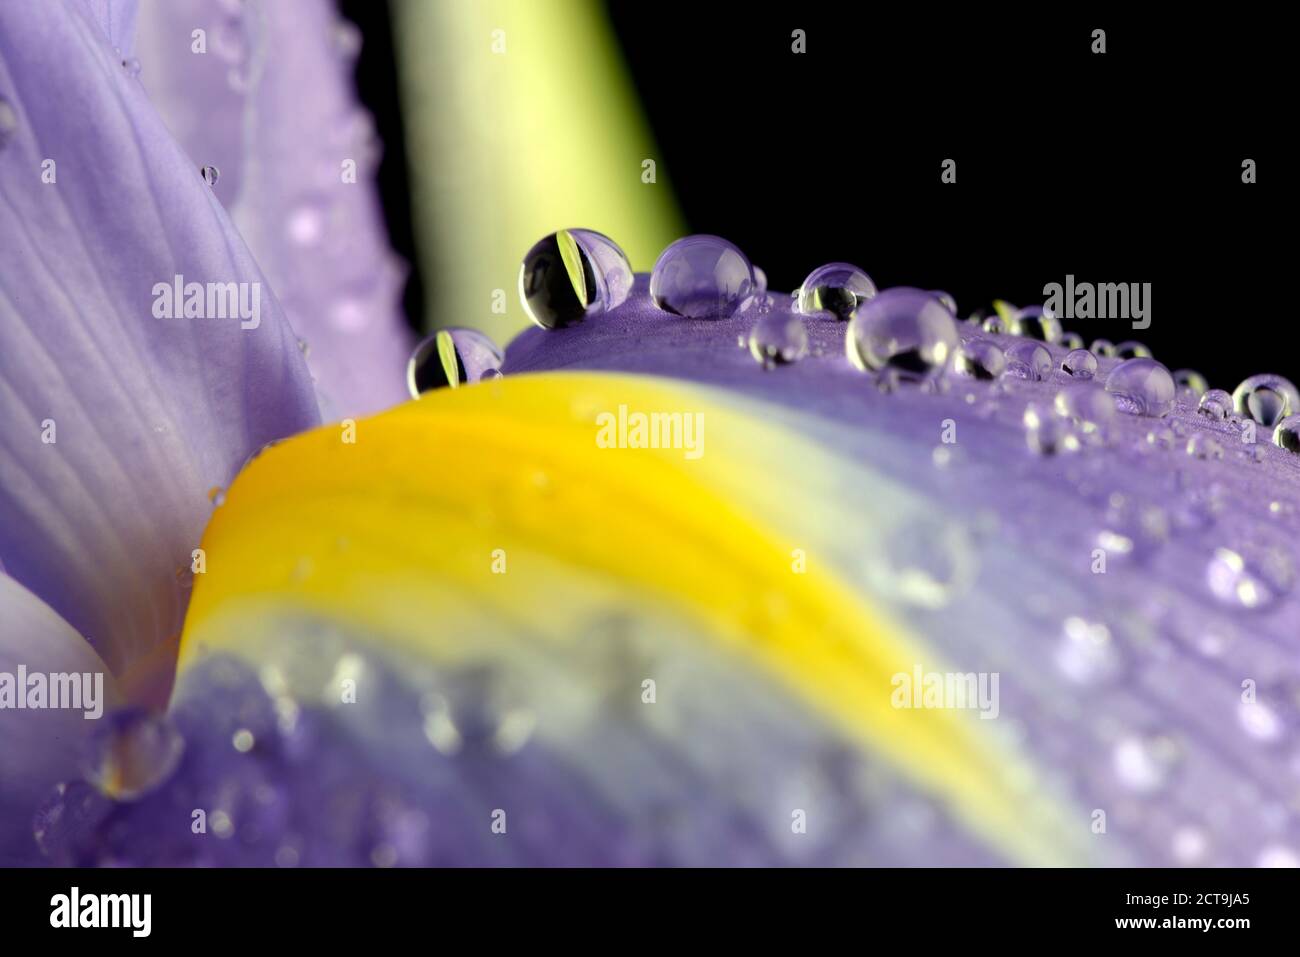 Water drops with reflection on petal of iris, Iridaceae, in front of black background Stock Photo